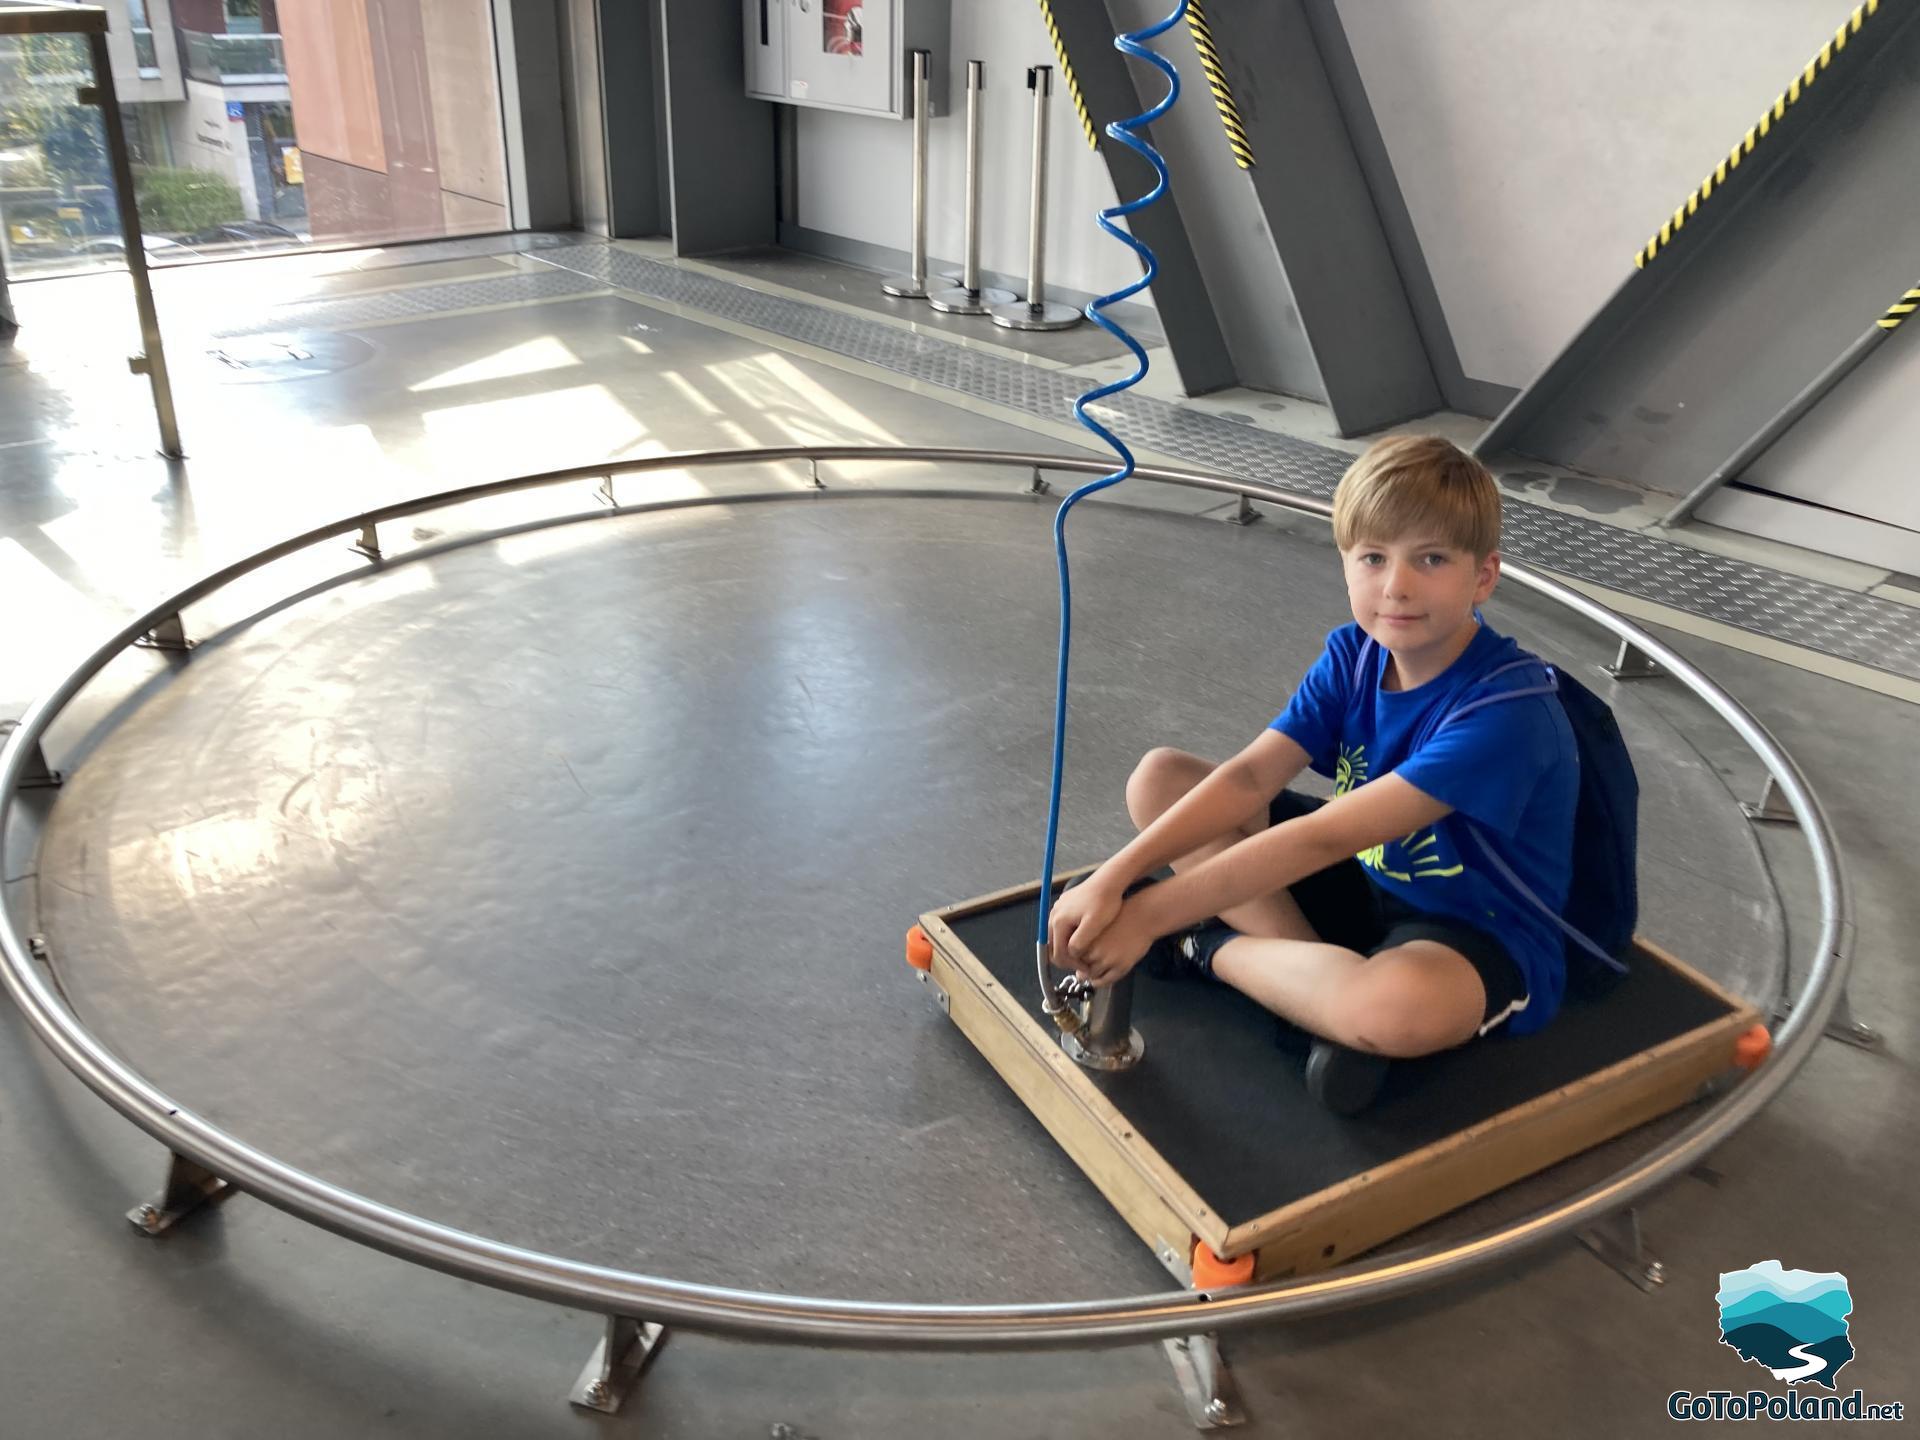 a boy is driving on a special vehicle in a science center